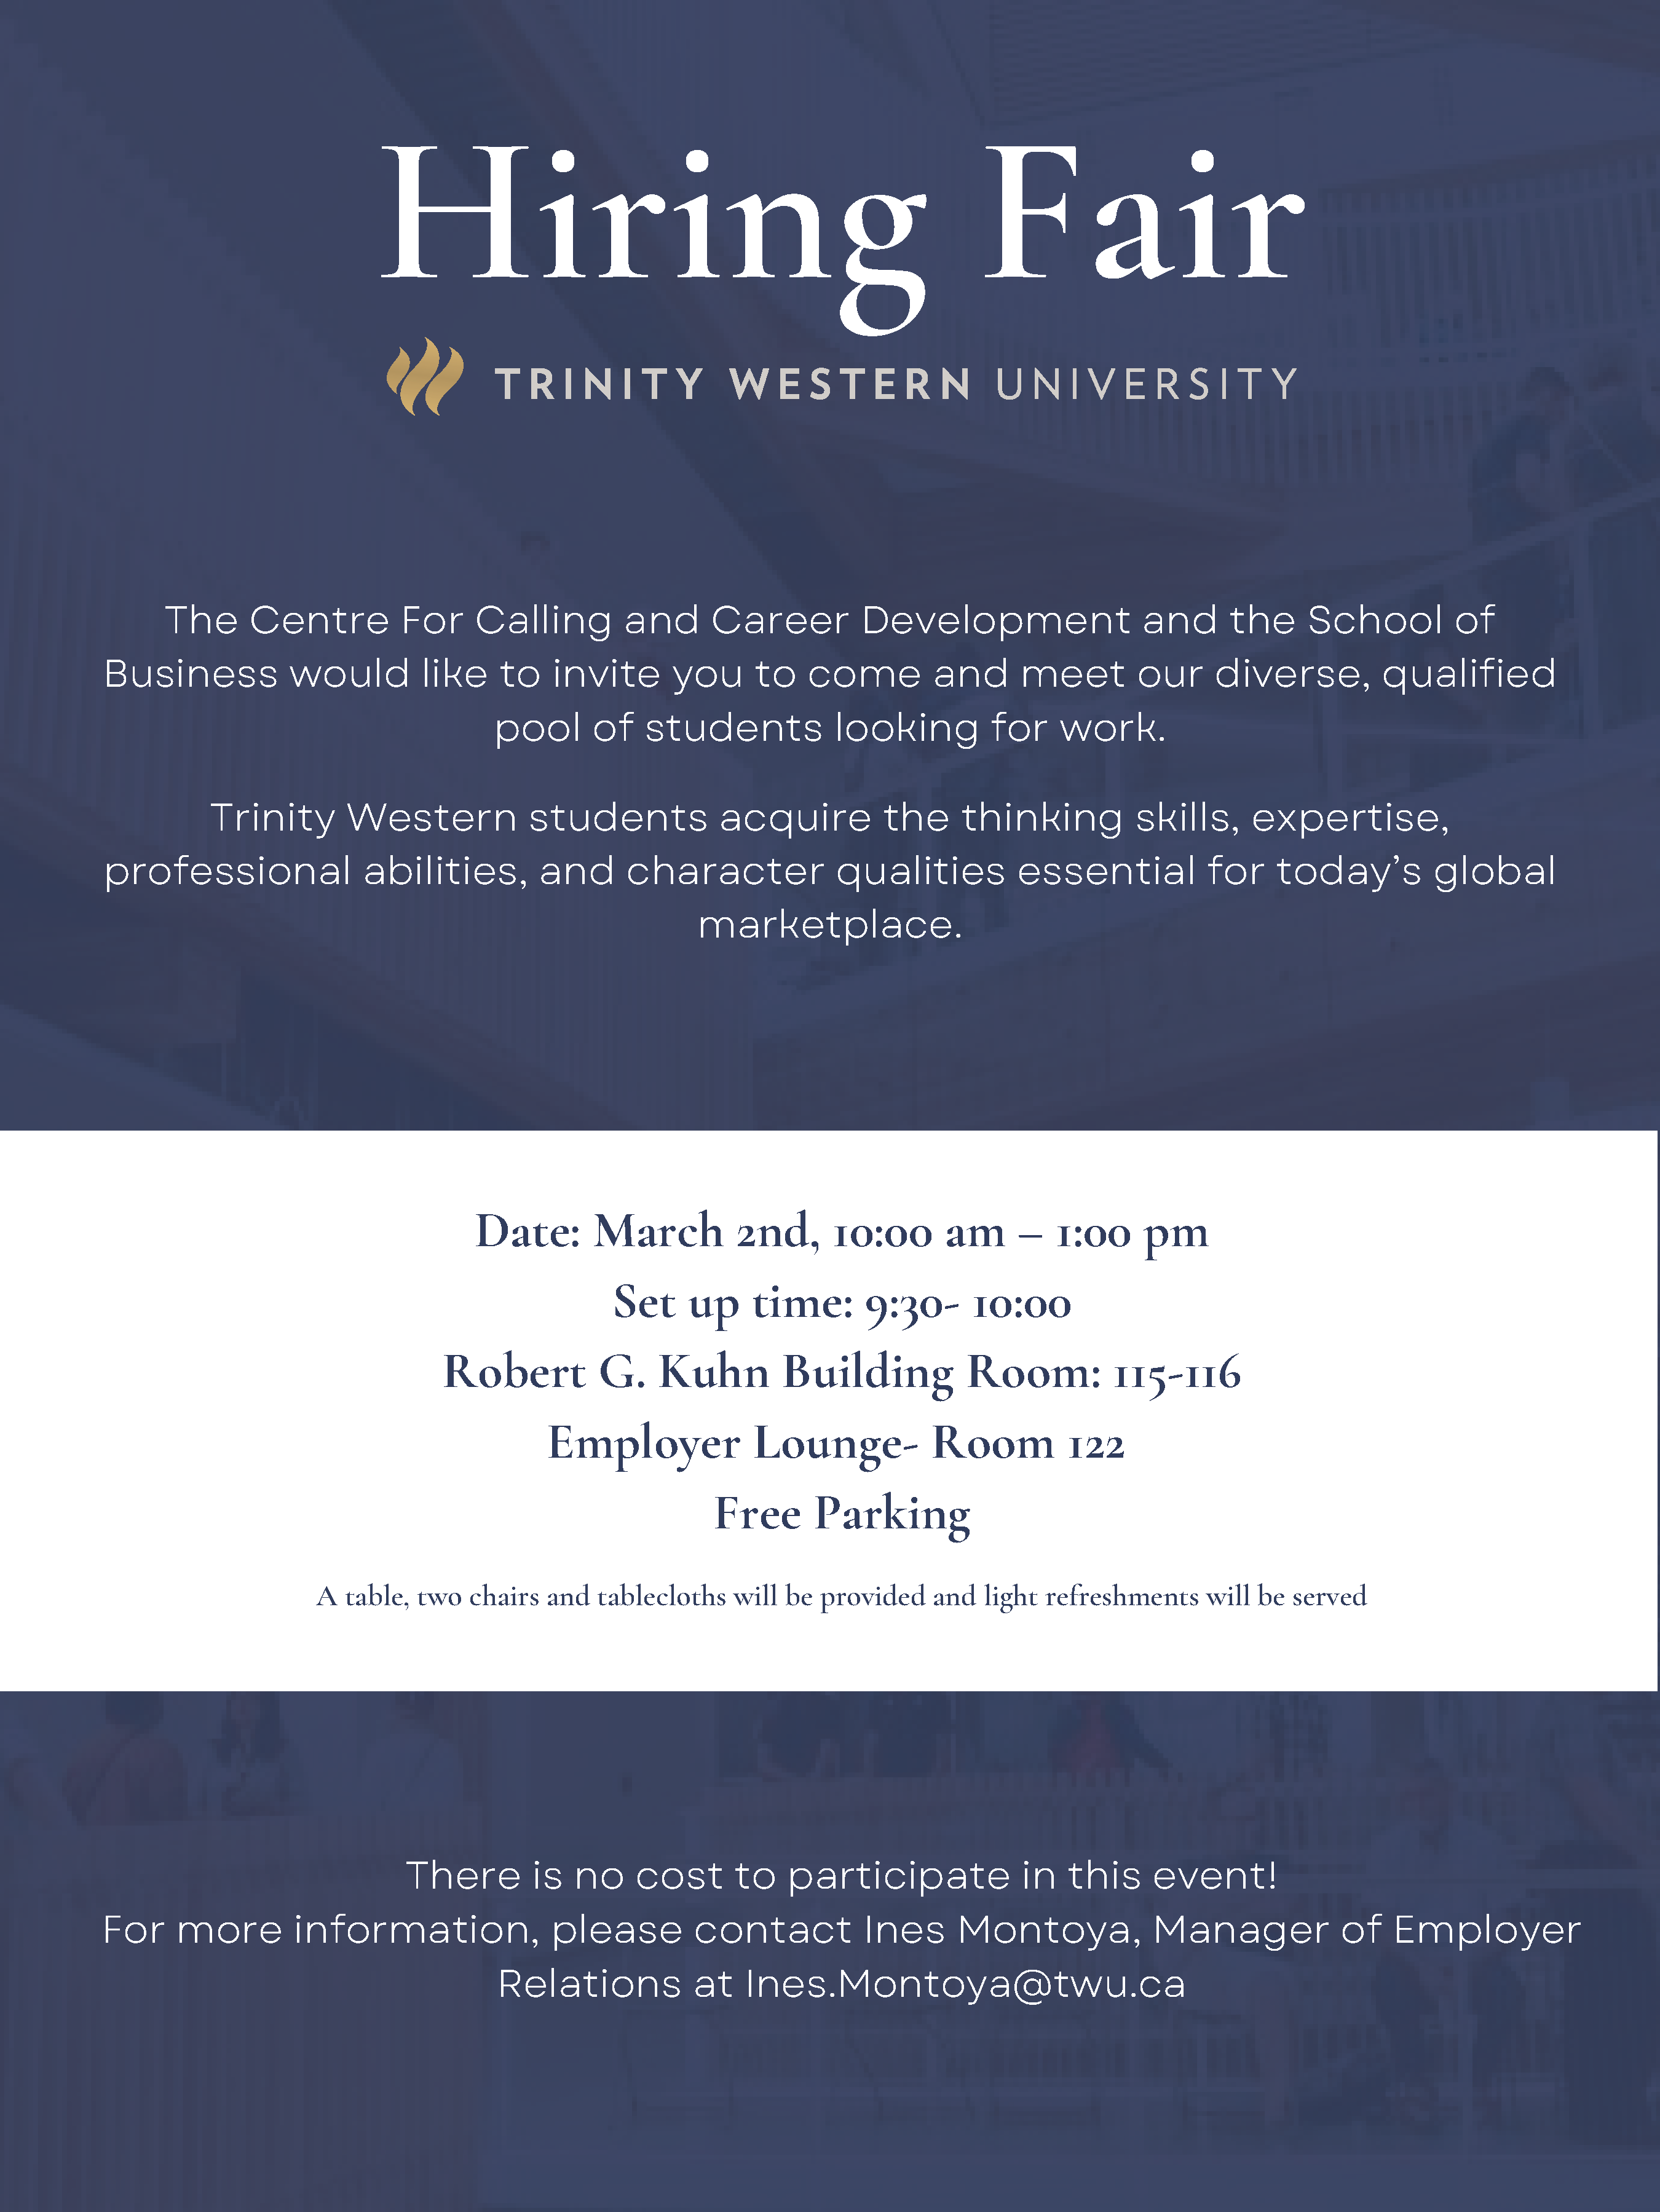 Image for Employer Opportunity - Free Hiring Fair on March 2 at Trinity Western University